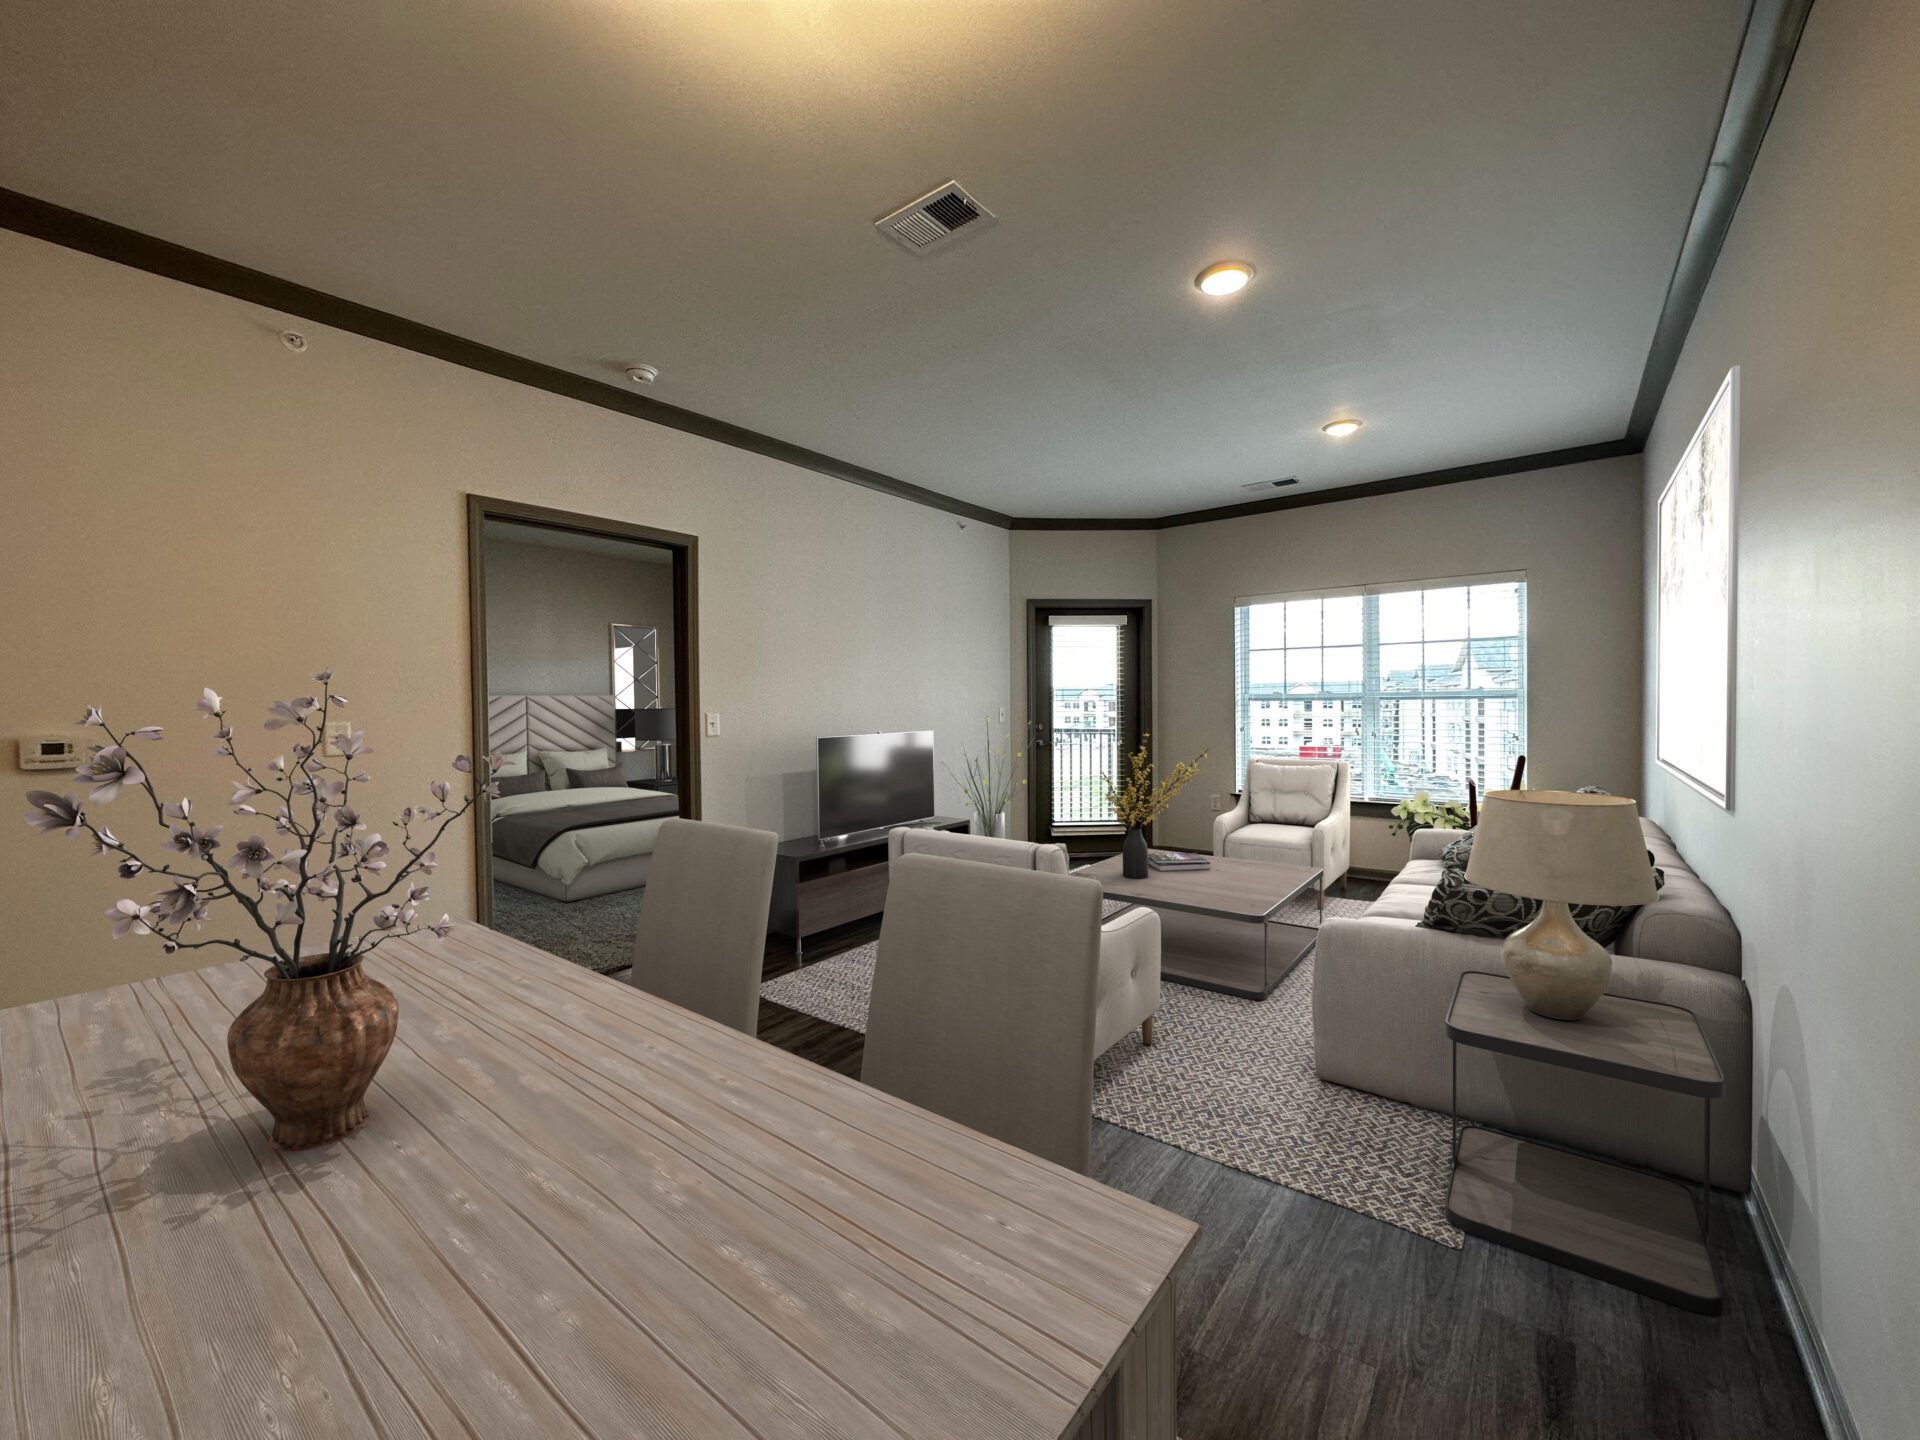 One Bedroom Rental Apartments-Treadway at New Trails Apartments